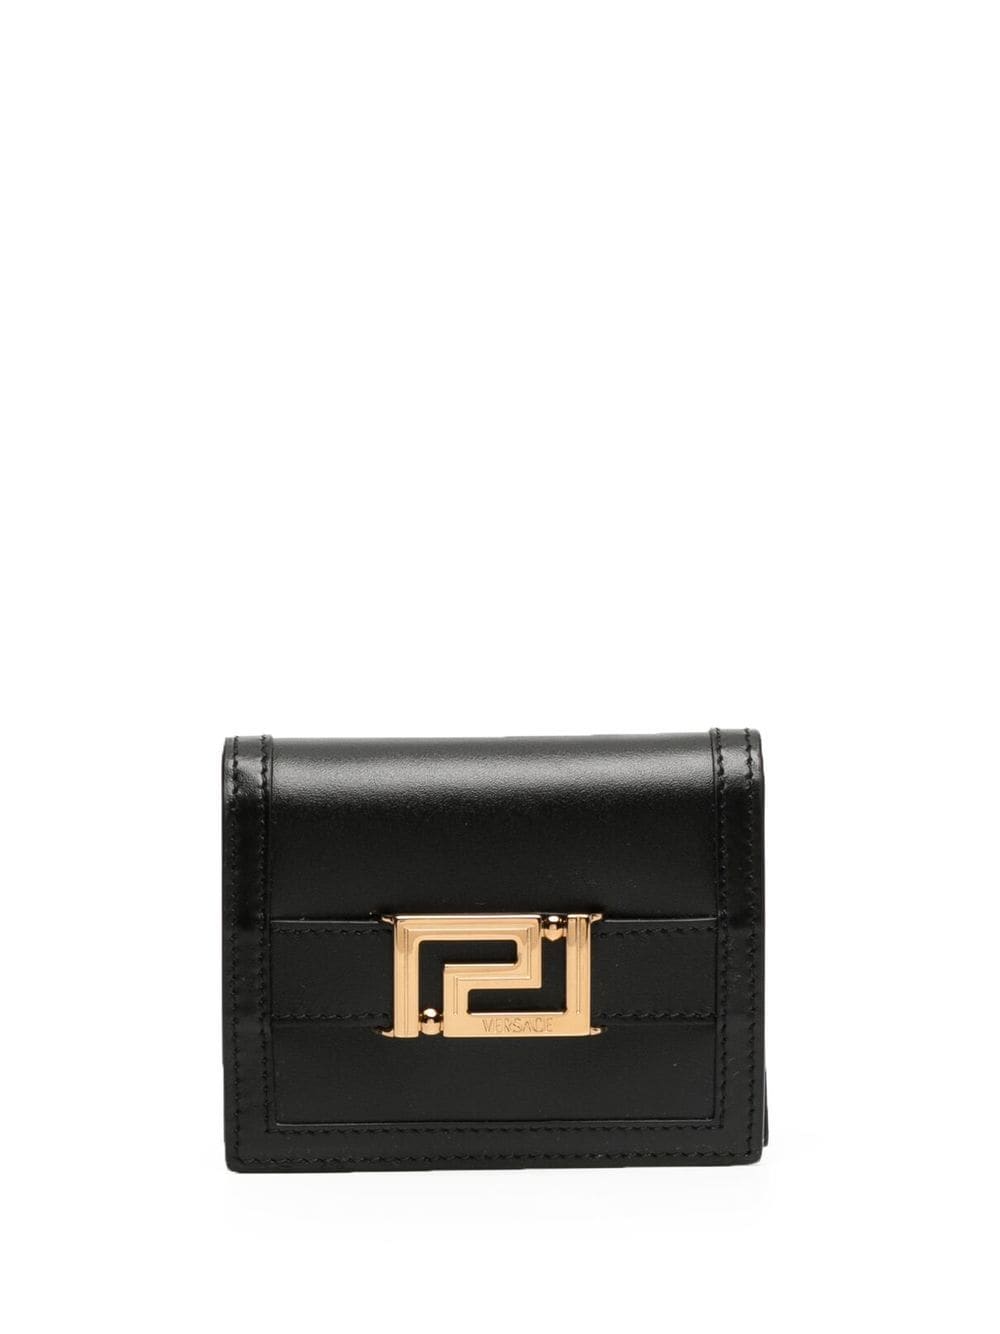 Bi-fold leather wallet from Versace